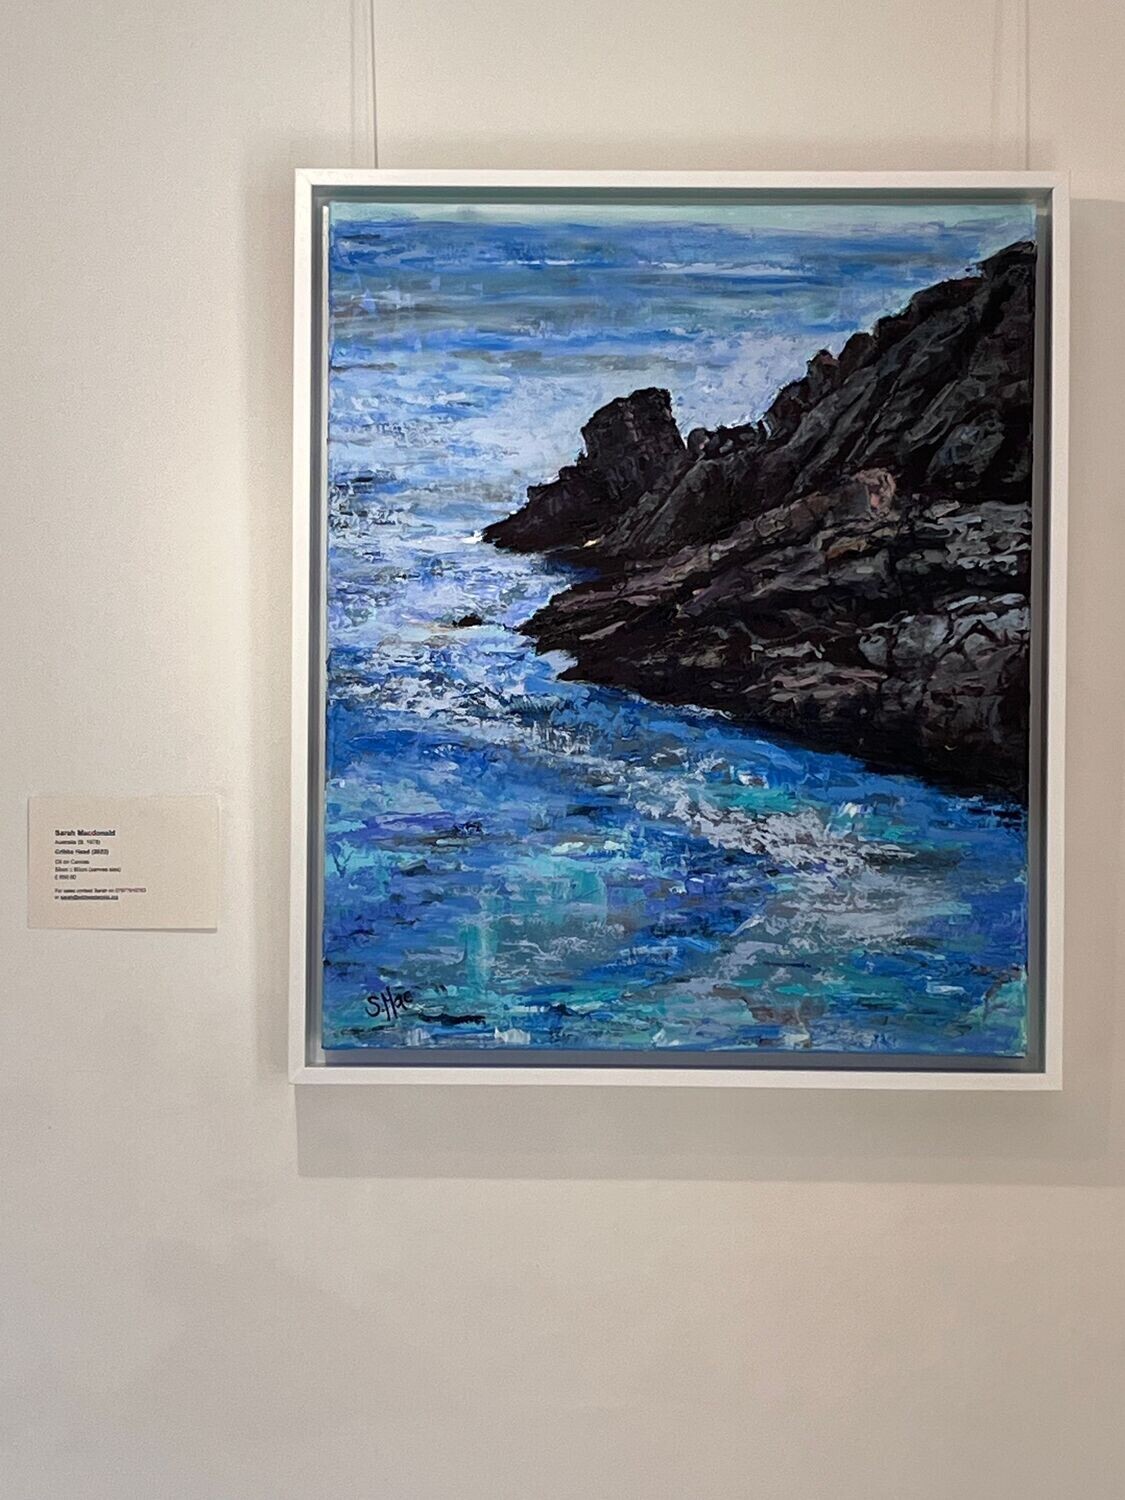 framed portrait orientated painting with label to the left. The painting is two thirds sea with one third being rocky headland. The rocks are dark brown, peach and grey, the sea is vibrantly textured aqua, blues, greys and lavender. The sea wraps around the rocks which are coming out of the frame from the top right.